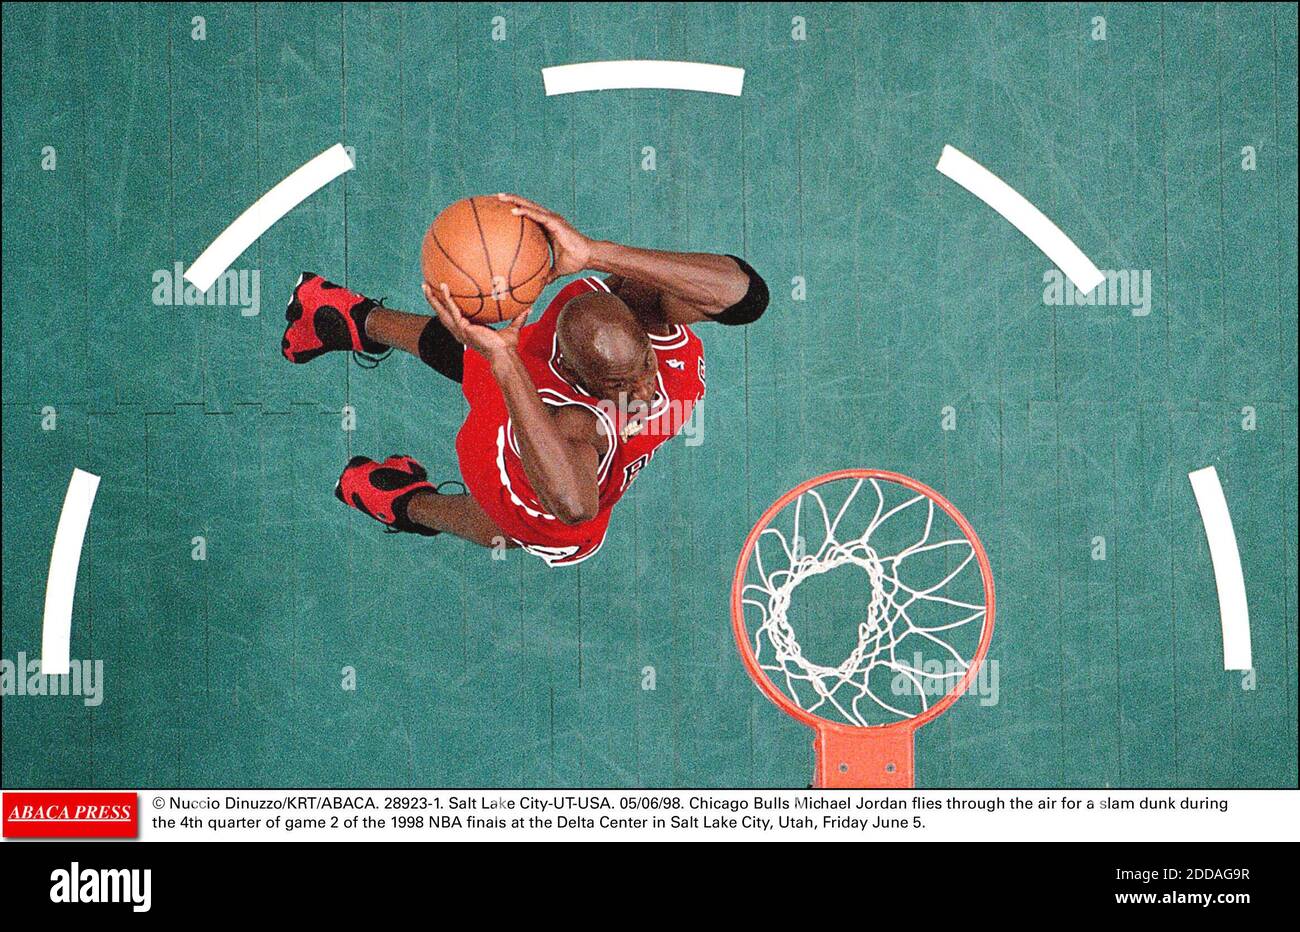 NO FILM, NO VIDEO, NO TV, NO DOCUMENTARY - © Nuccio Dinuzzo/KRT/ABACA. 28923-1. Salt Lake City-UT-USA. 05/06/98. Chicago Bulls Michael Jordan flies through the air for a slam dunk during the 4th quarter of game 2 of the 1998 NBA finals at the Delta Center in Salt Lake City, Utah, Friday June 5. Stock Photo